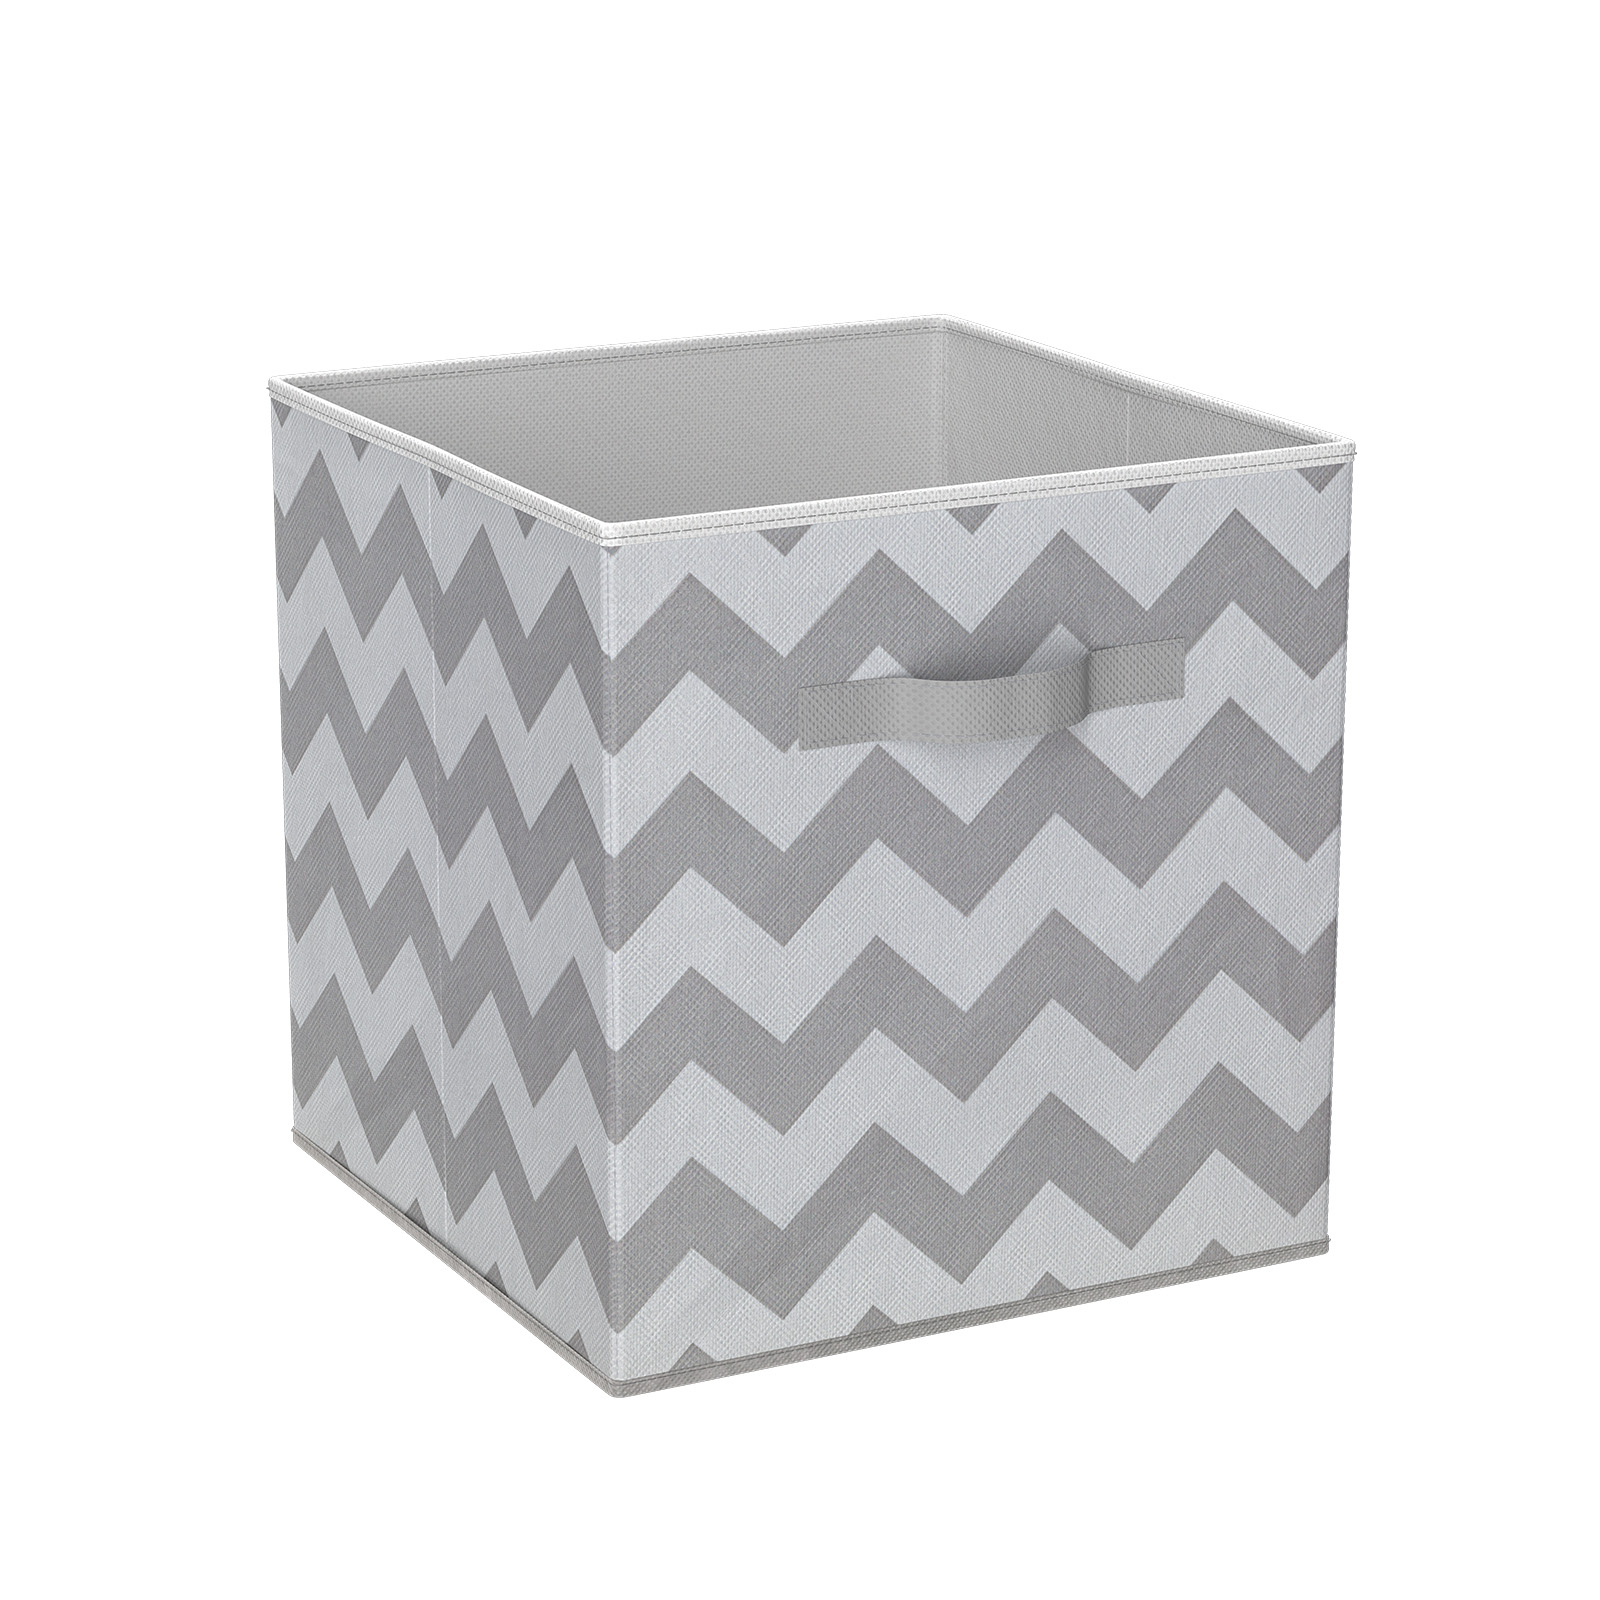 Clever Cube Compact Fabric Insert Cool Grey Chevron